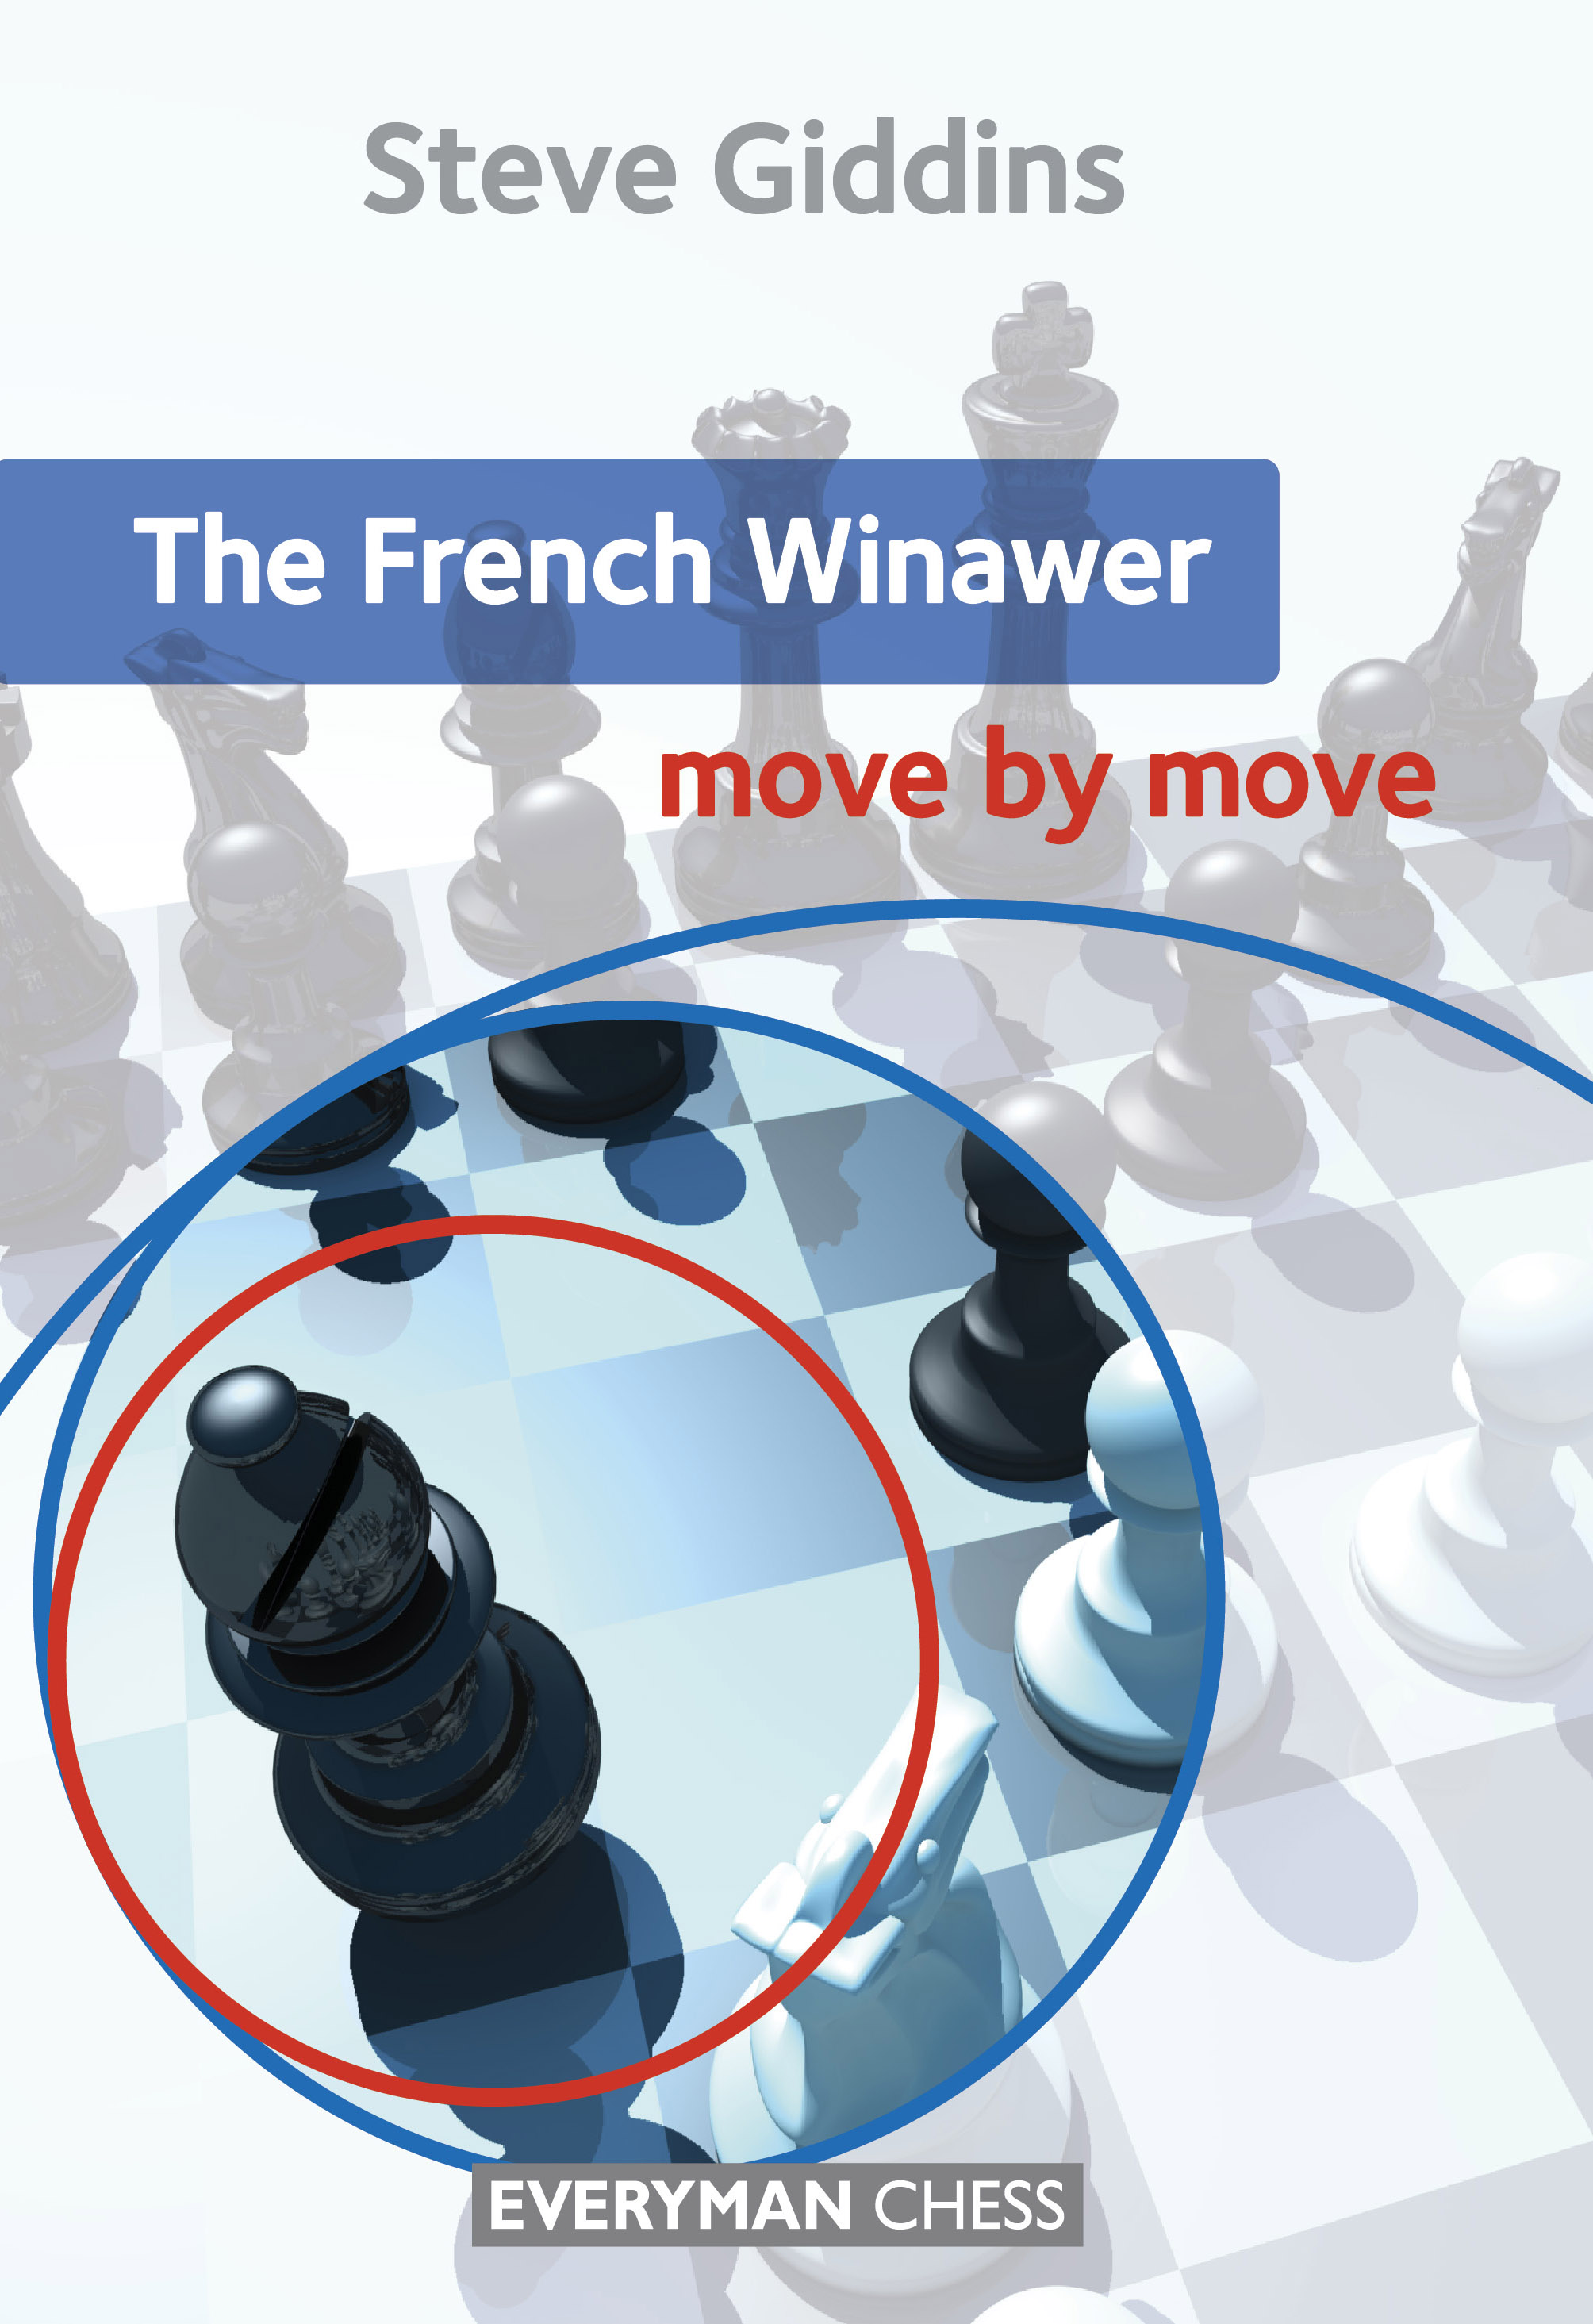 The French Winawer: Move by move, Steve Giddins